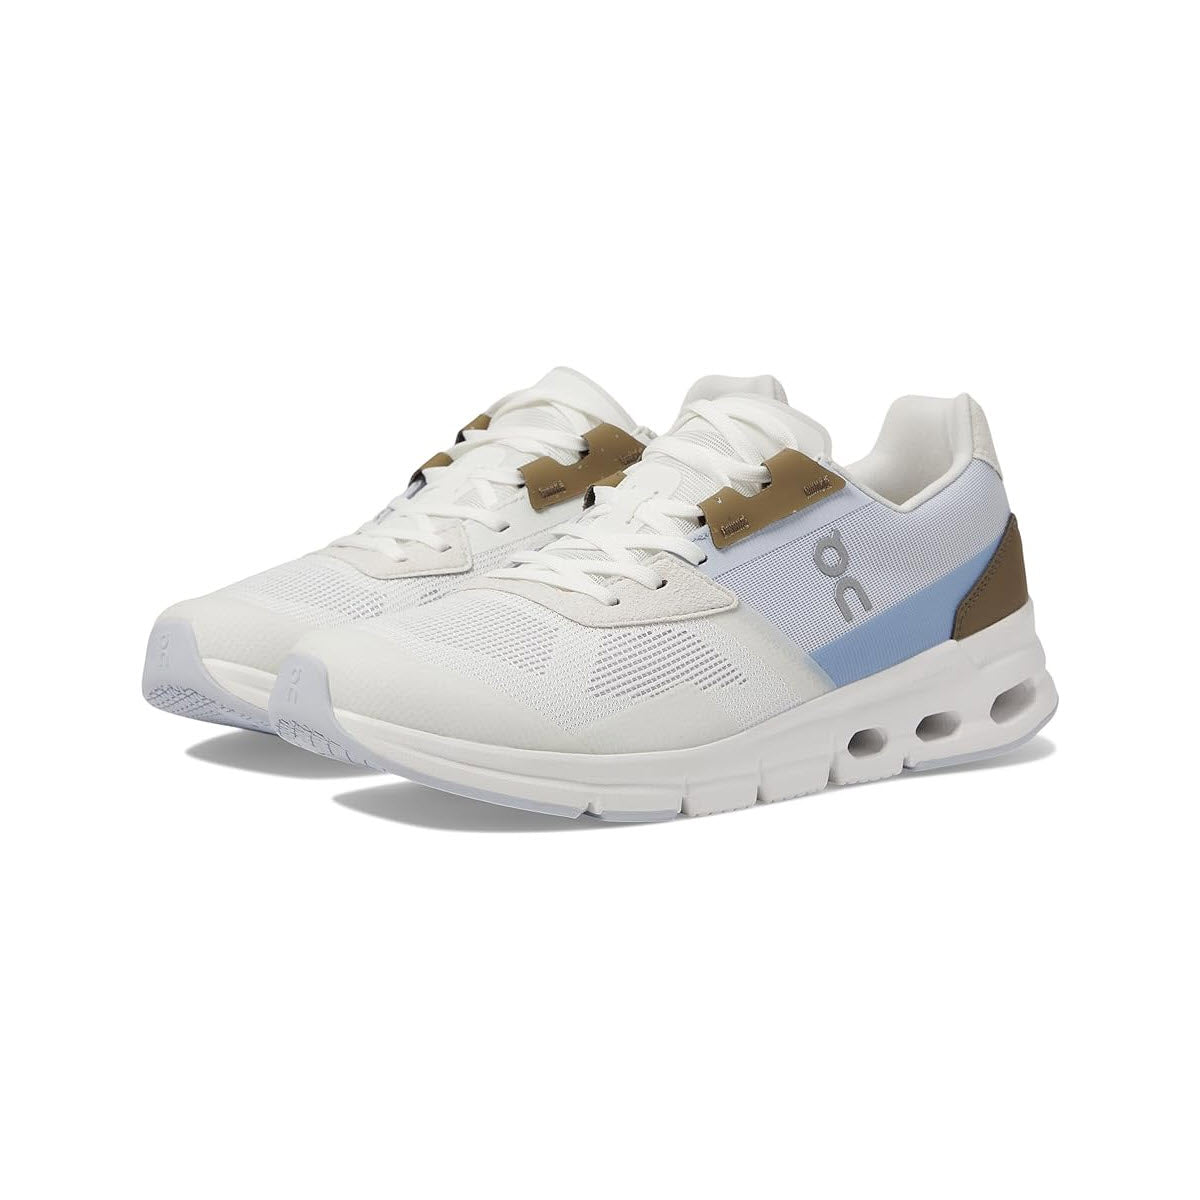 A pair of ON CLOUDRIFT IVORY/HEATHER athletic shoes with a modern design and brown accents, displayed on a white background by On Running.